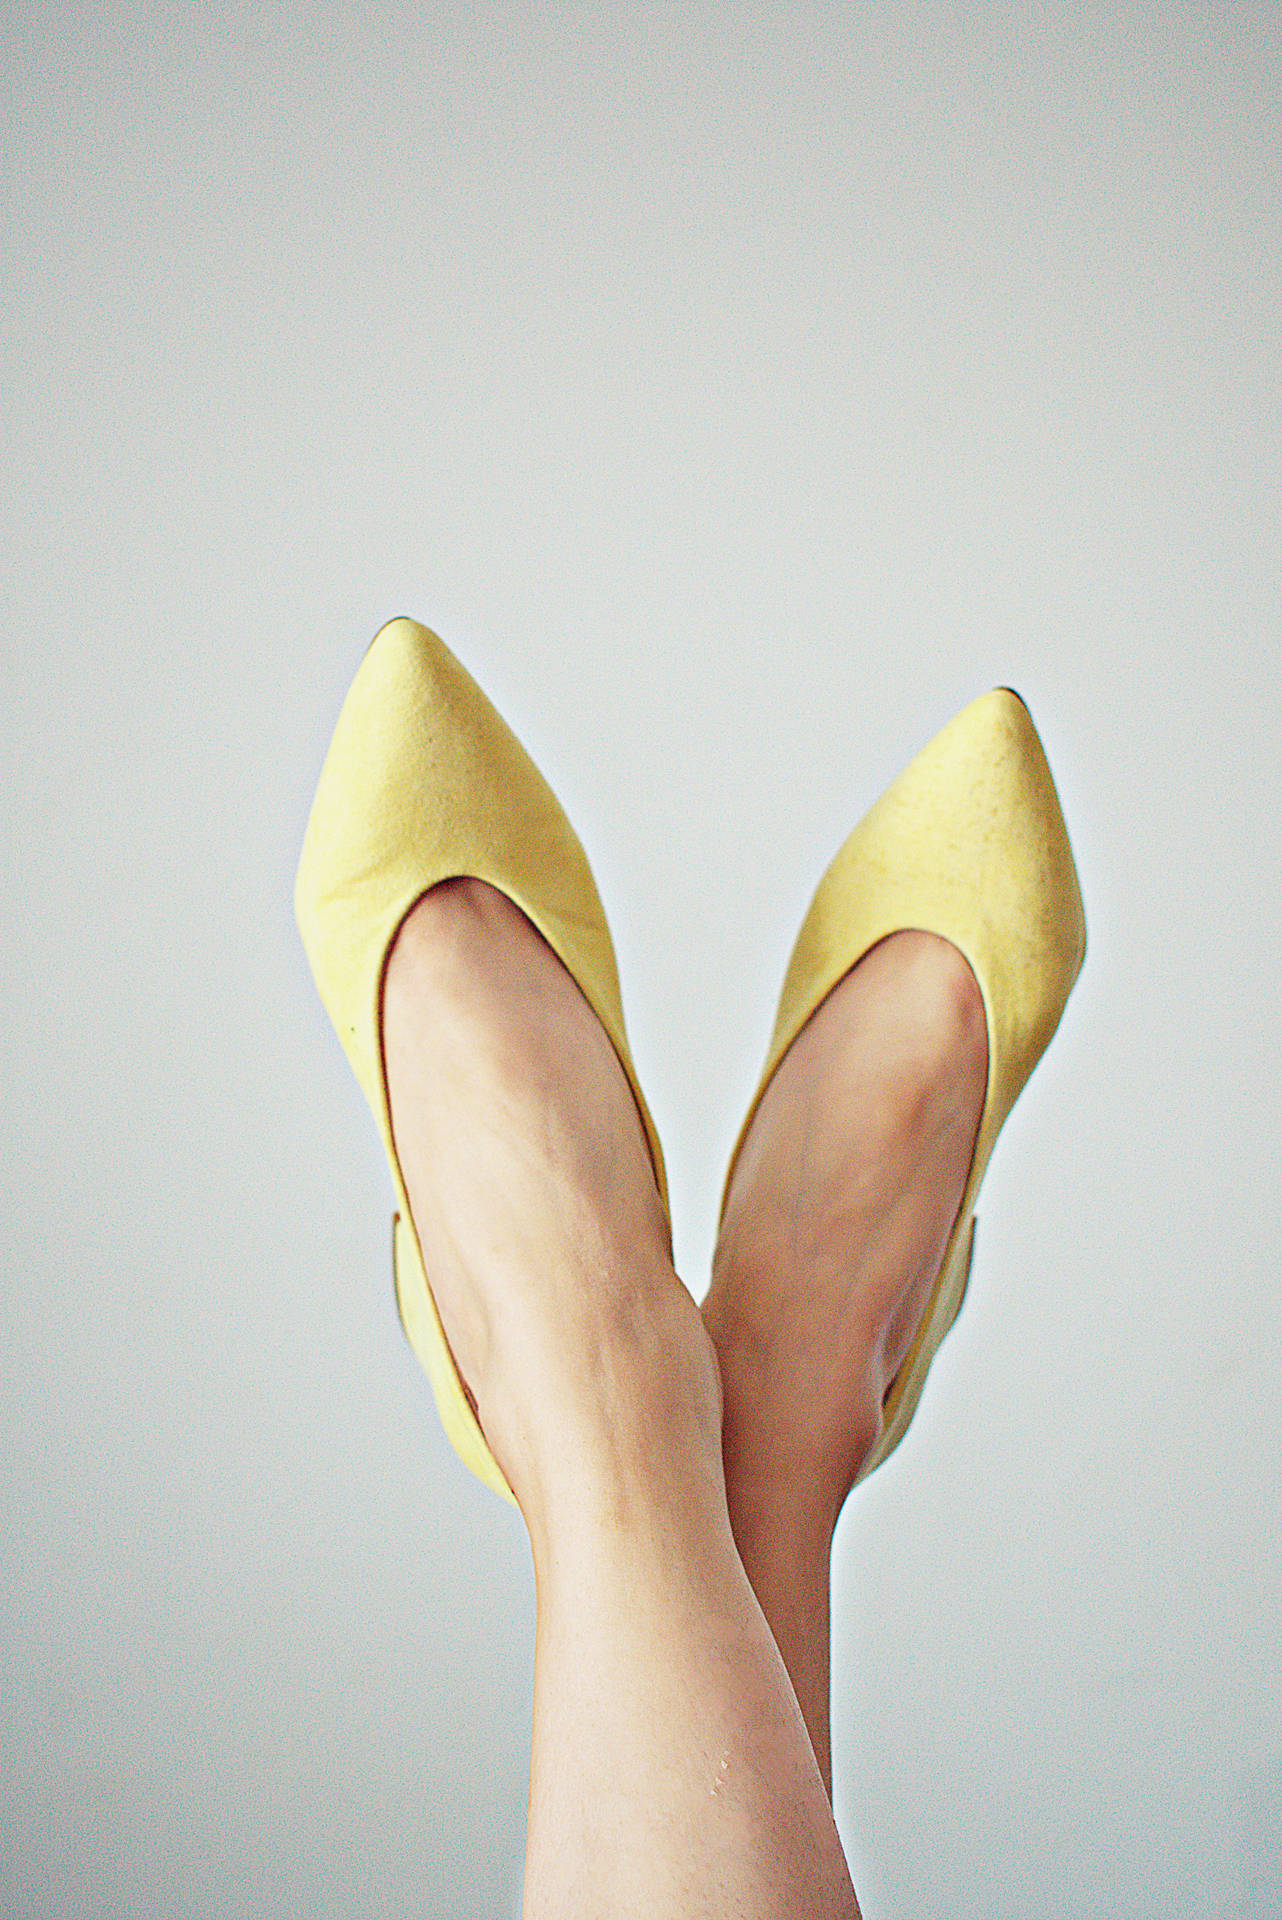 Pointy Toed Yellow Shoes Wallpaper